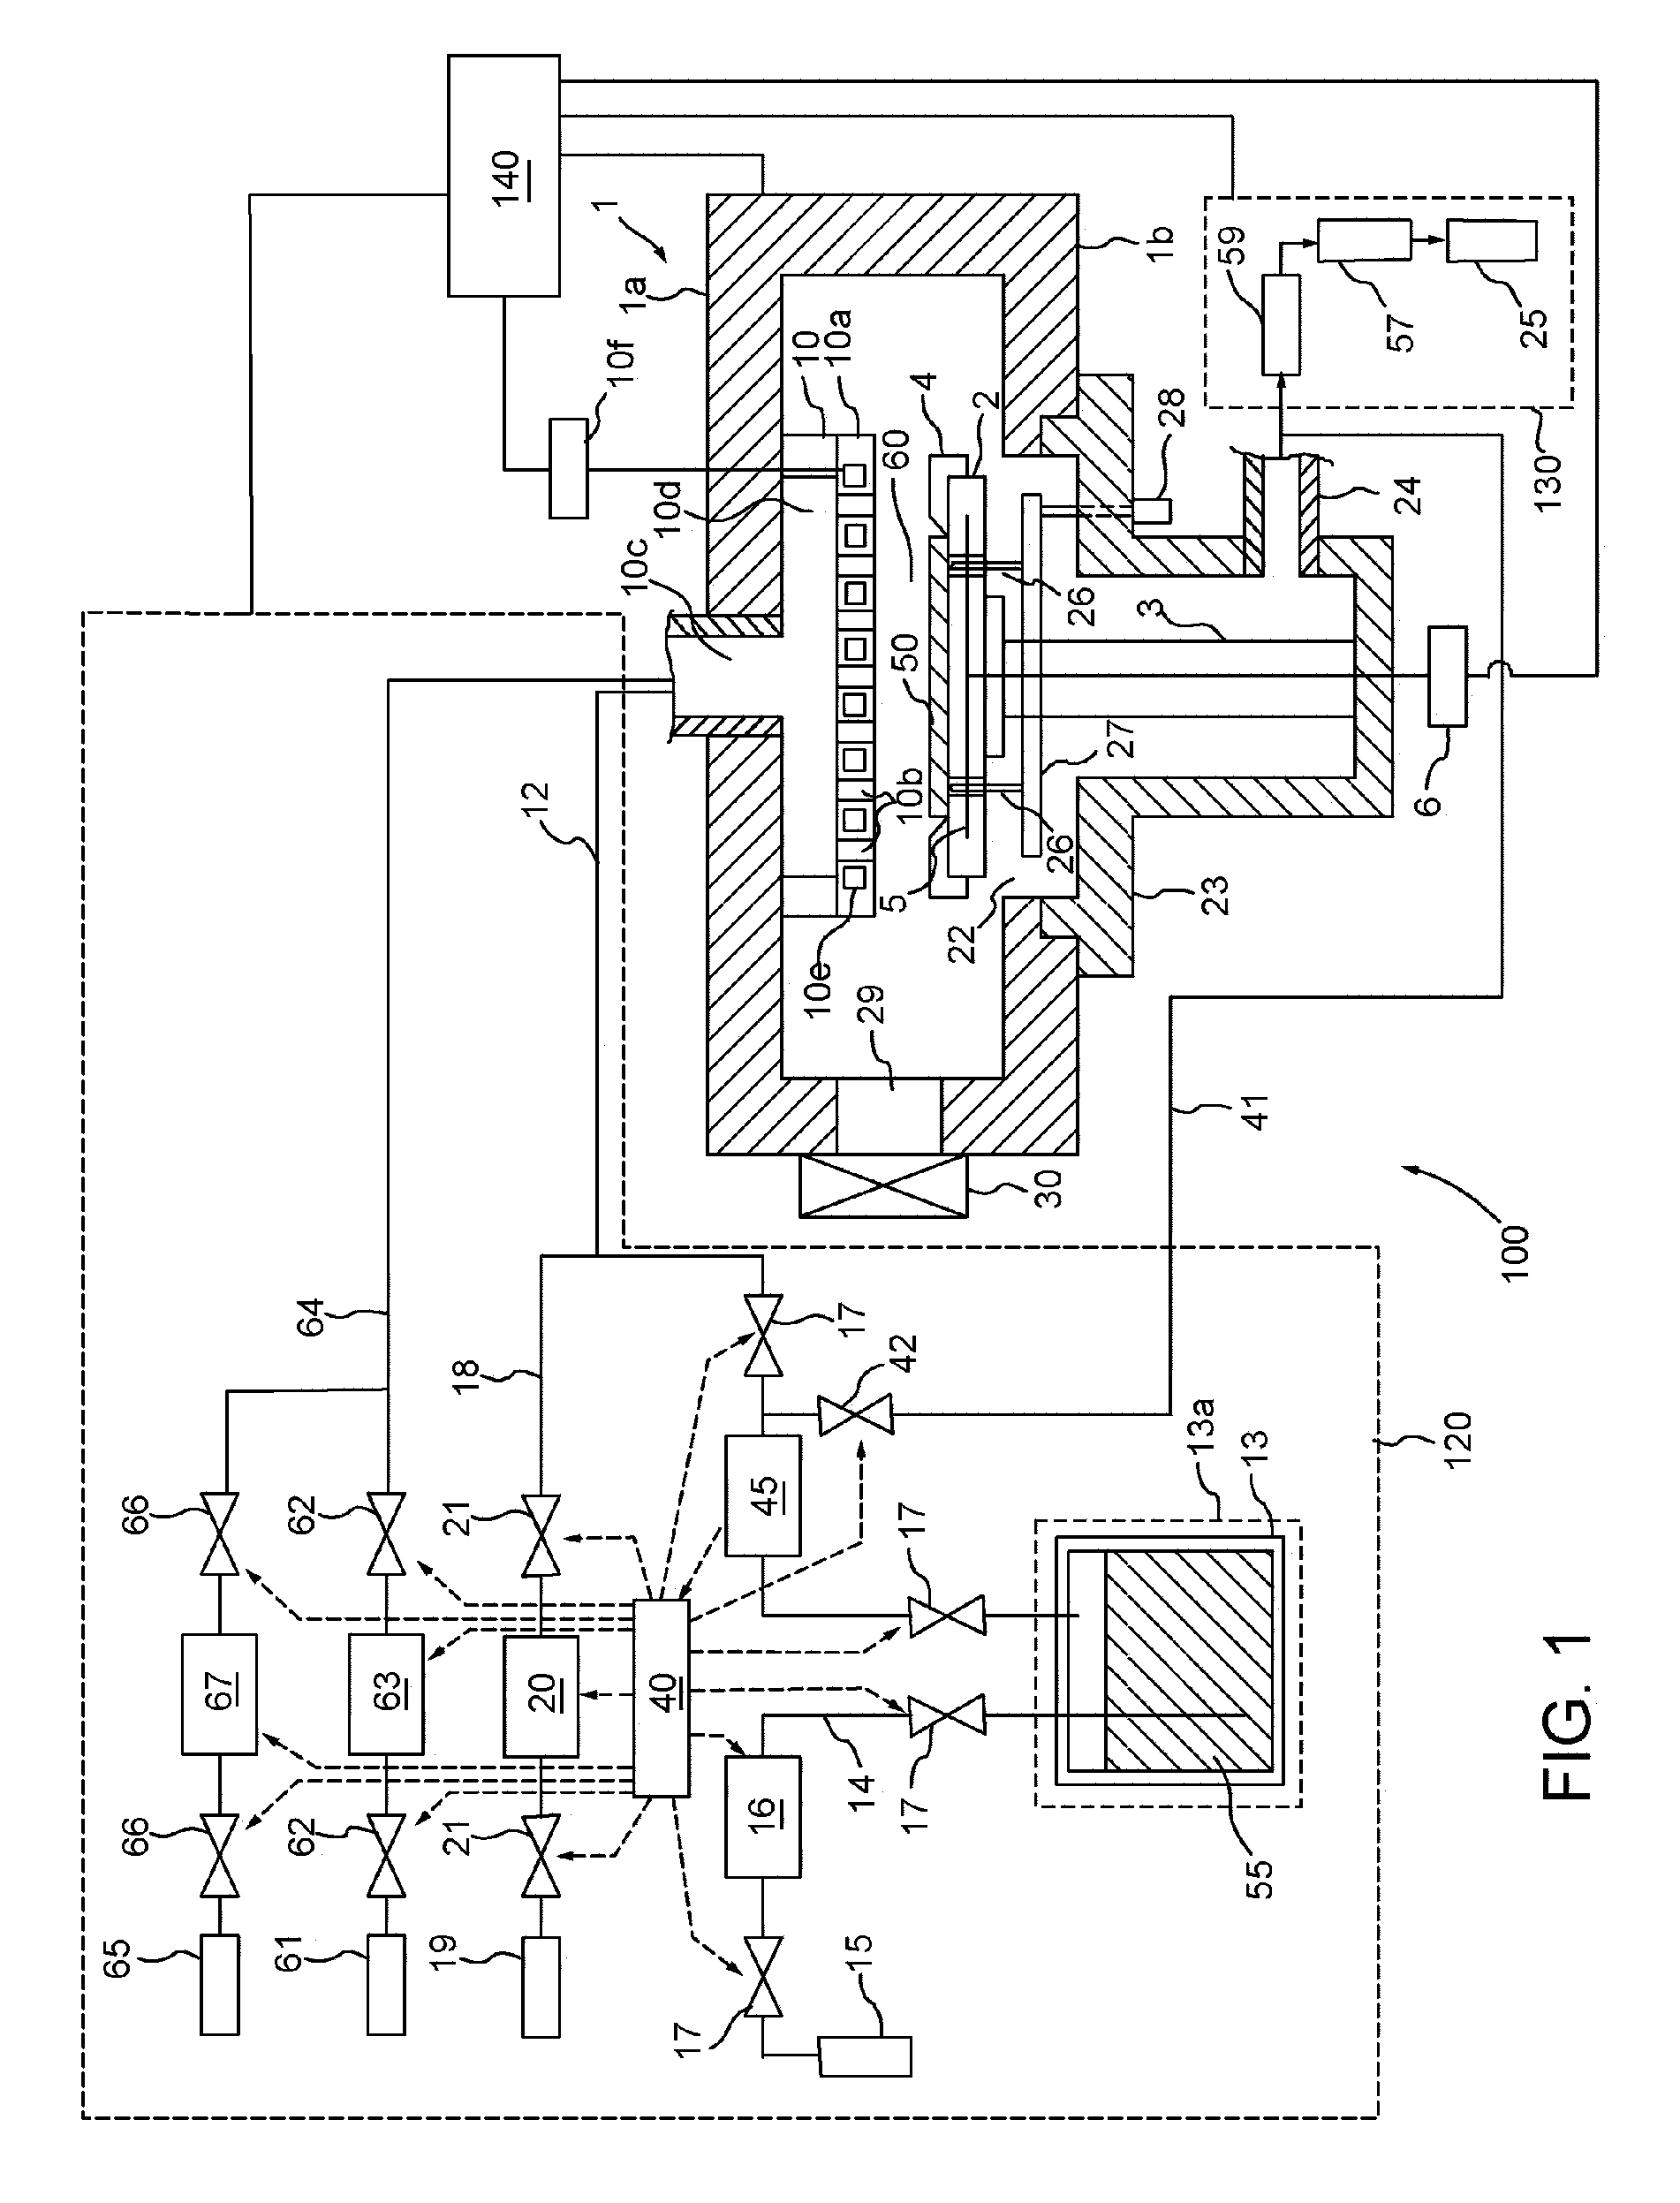 Method for forming a passivated metal layer